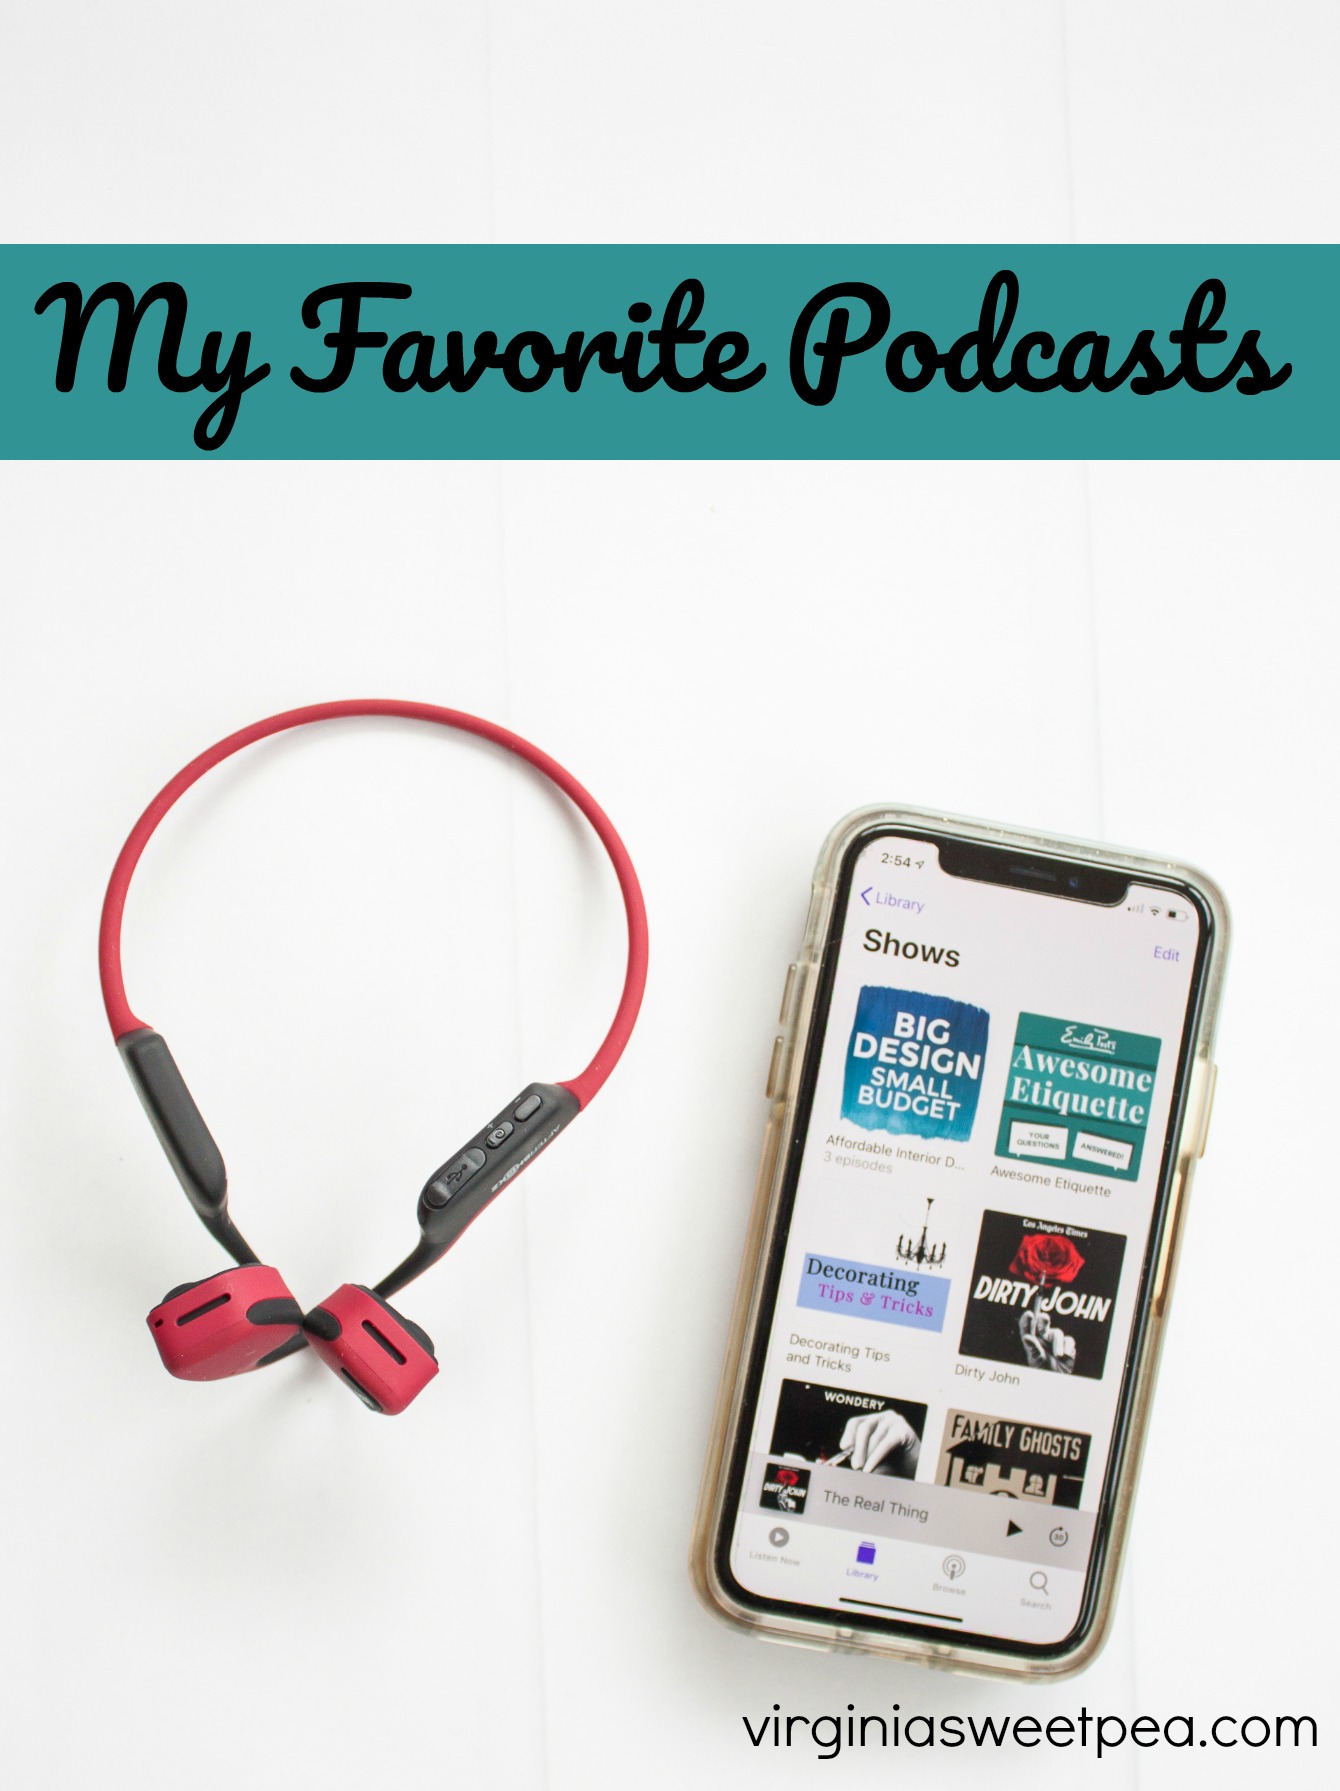 Get listening ideas for podcasts. Podcasts are great entertainment while driving, exercising, working around the house, or to listen to when you want to relax. #podcast #podcastideas #bestpodcasts